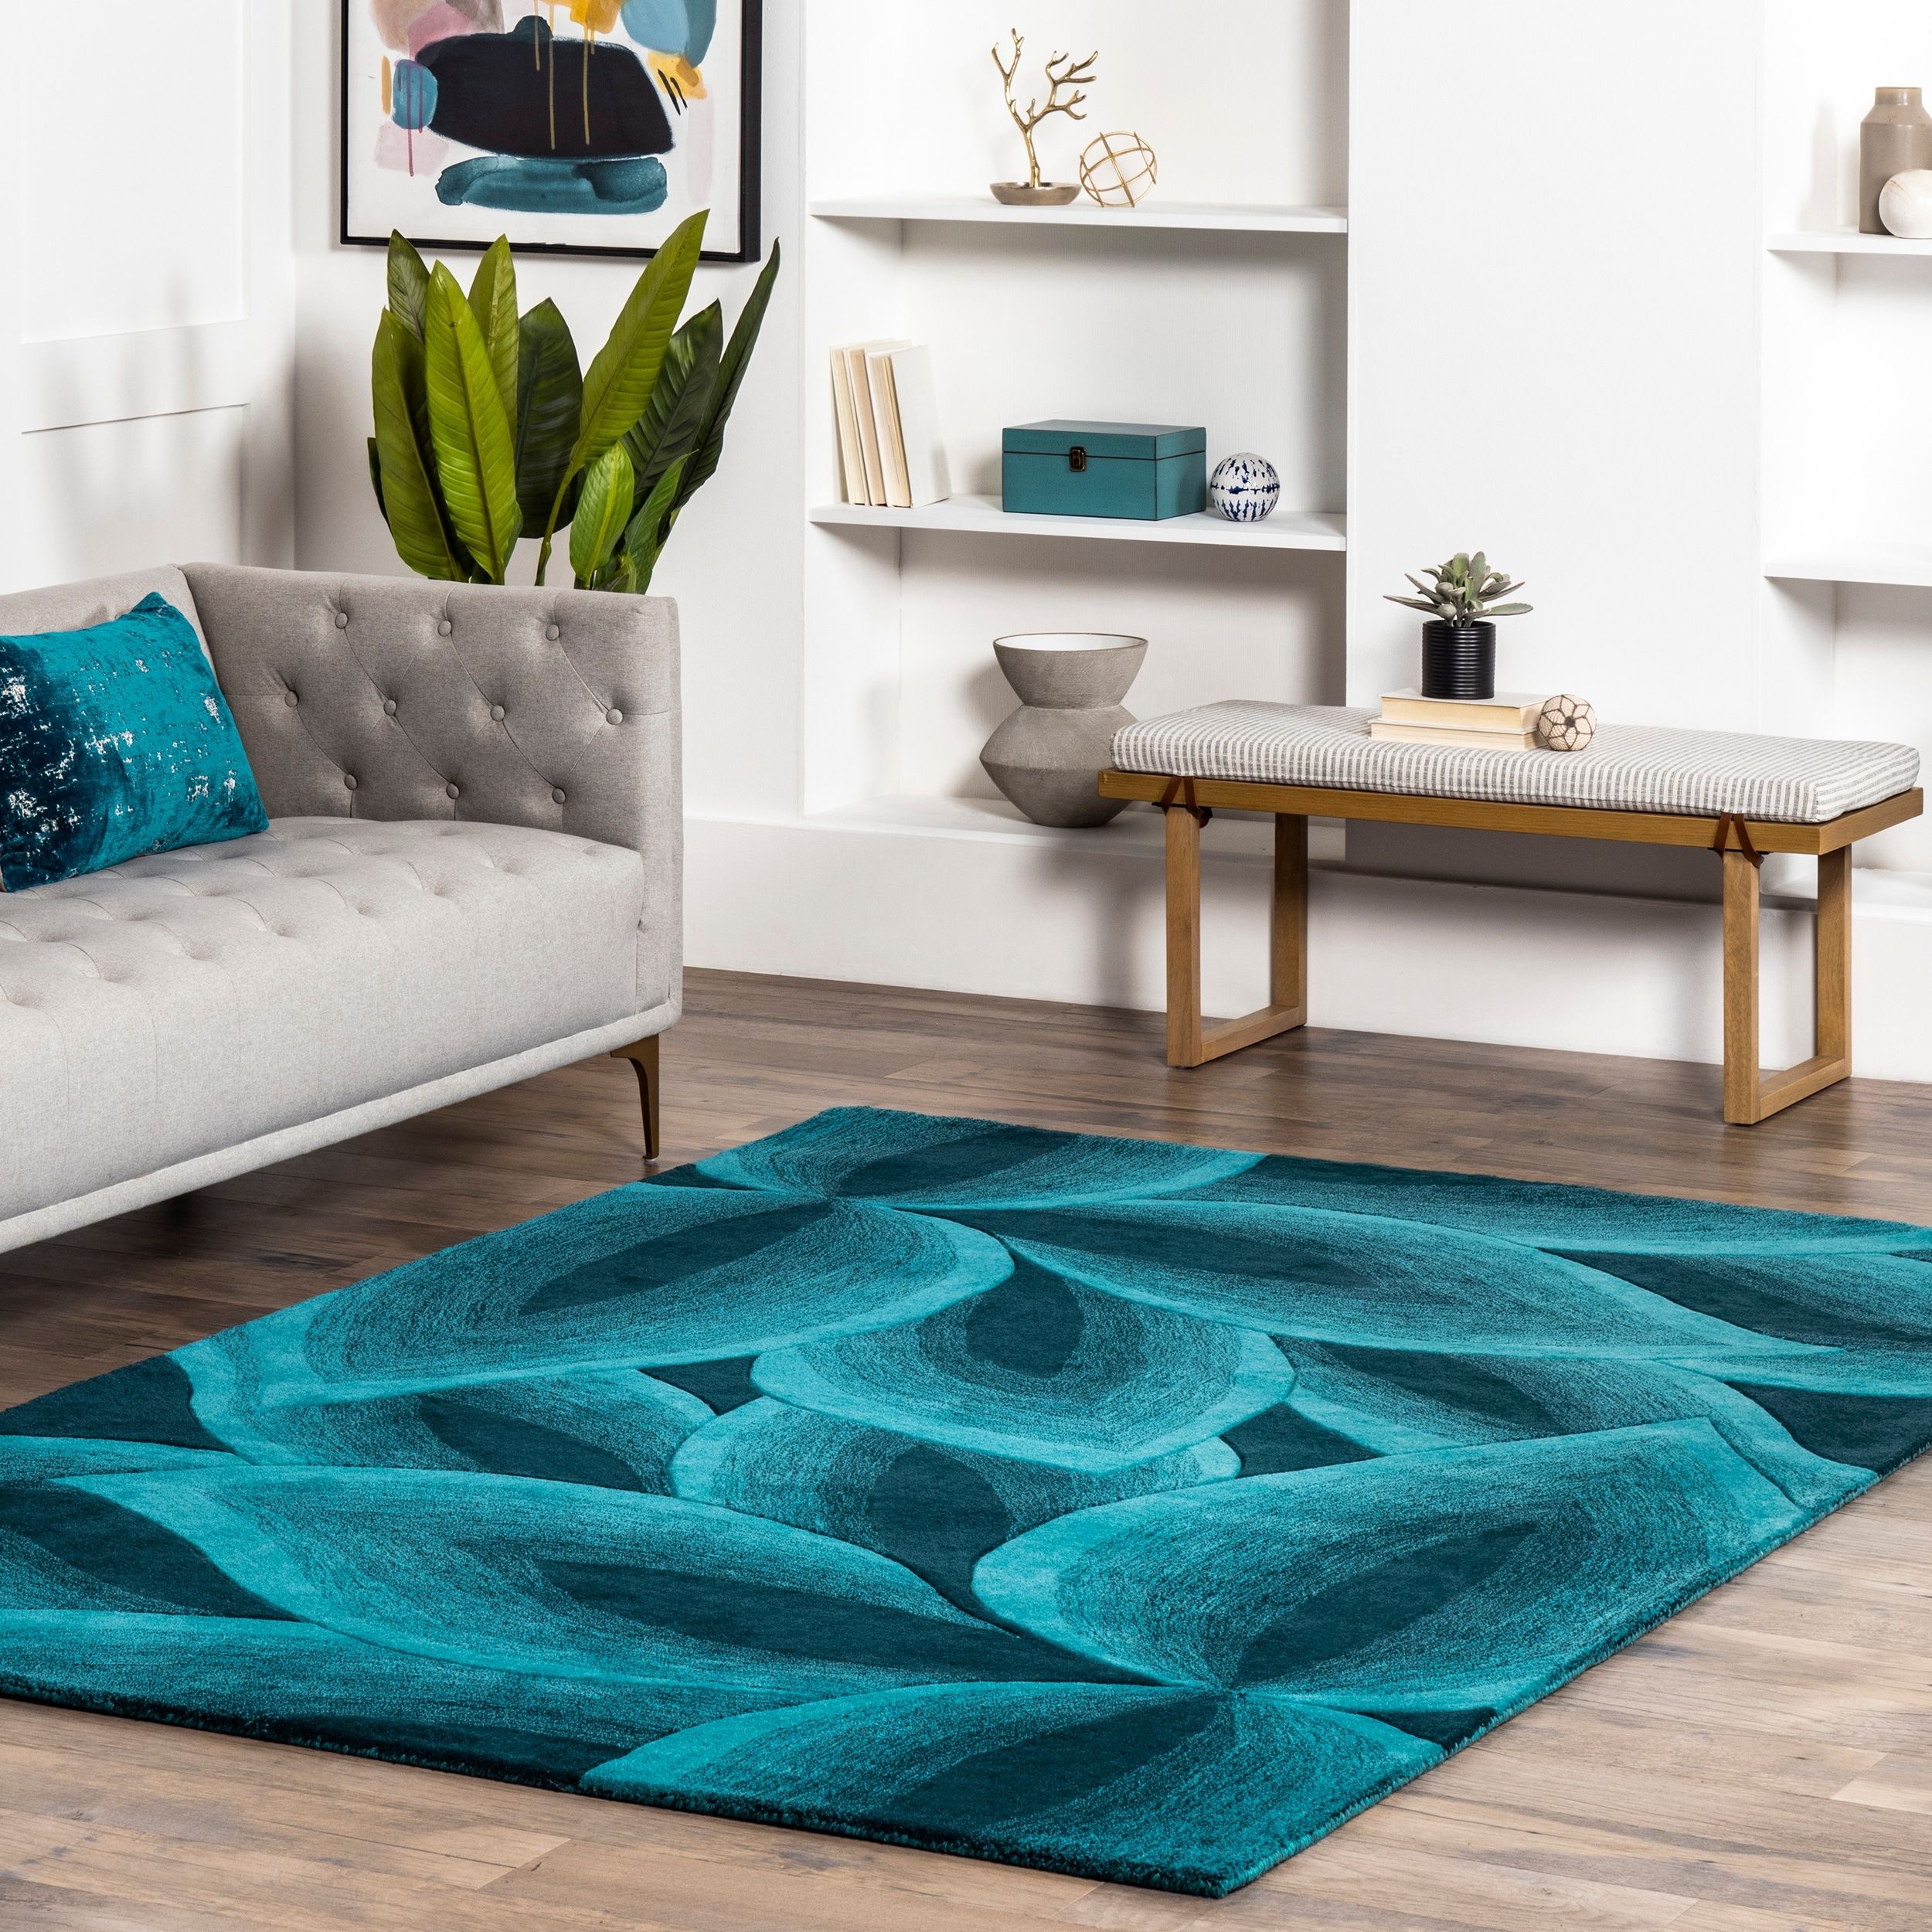 Nuloom Turquoise Handmade Leaves Wool Area Rug – Overstock – 7344098 With Regard To Turquoise Rugs (Photo 6 of 15)